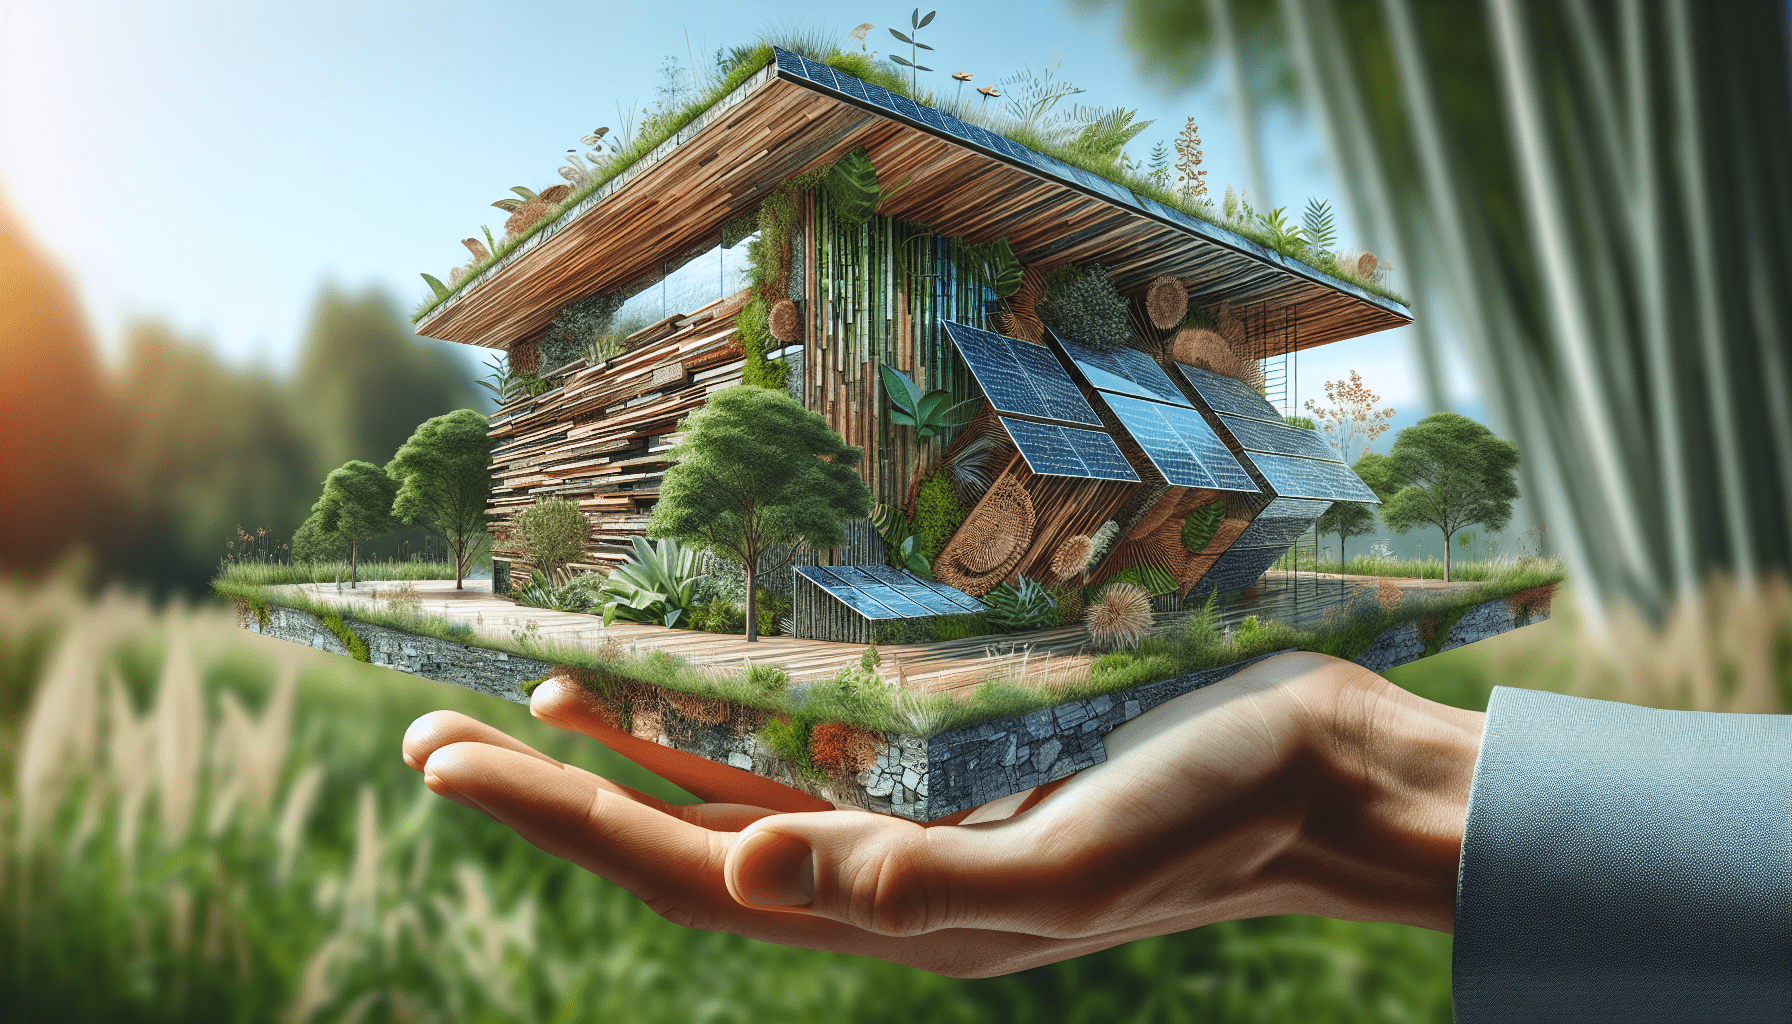 What Materials Are Used In Sustainable Architecture?